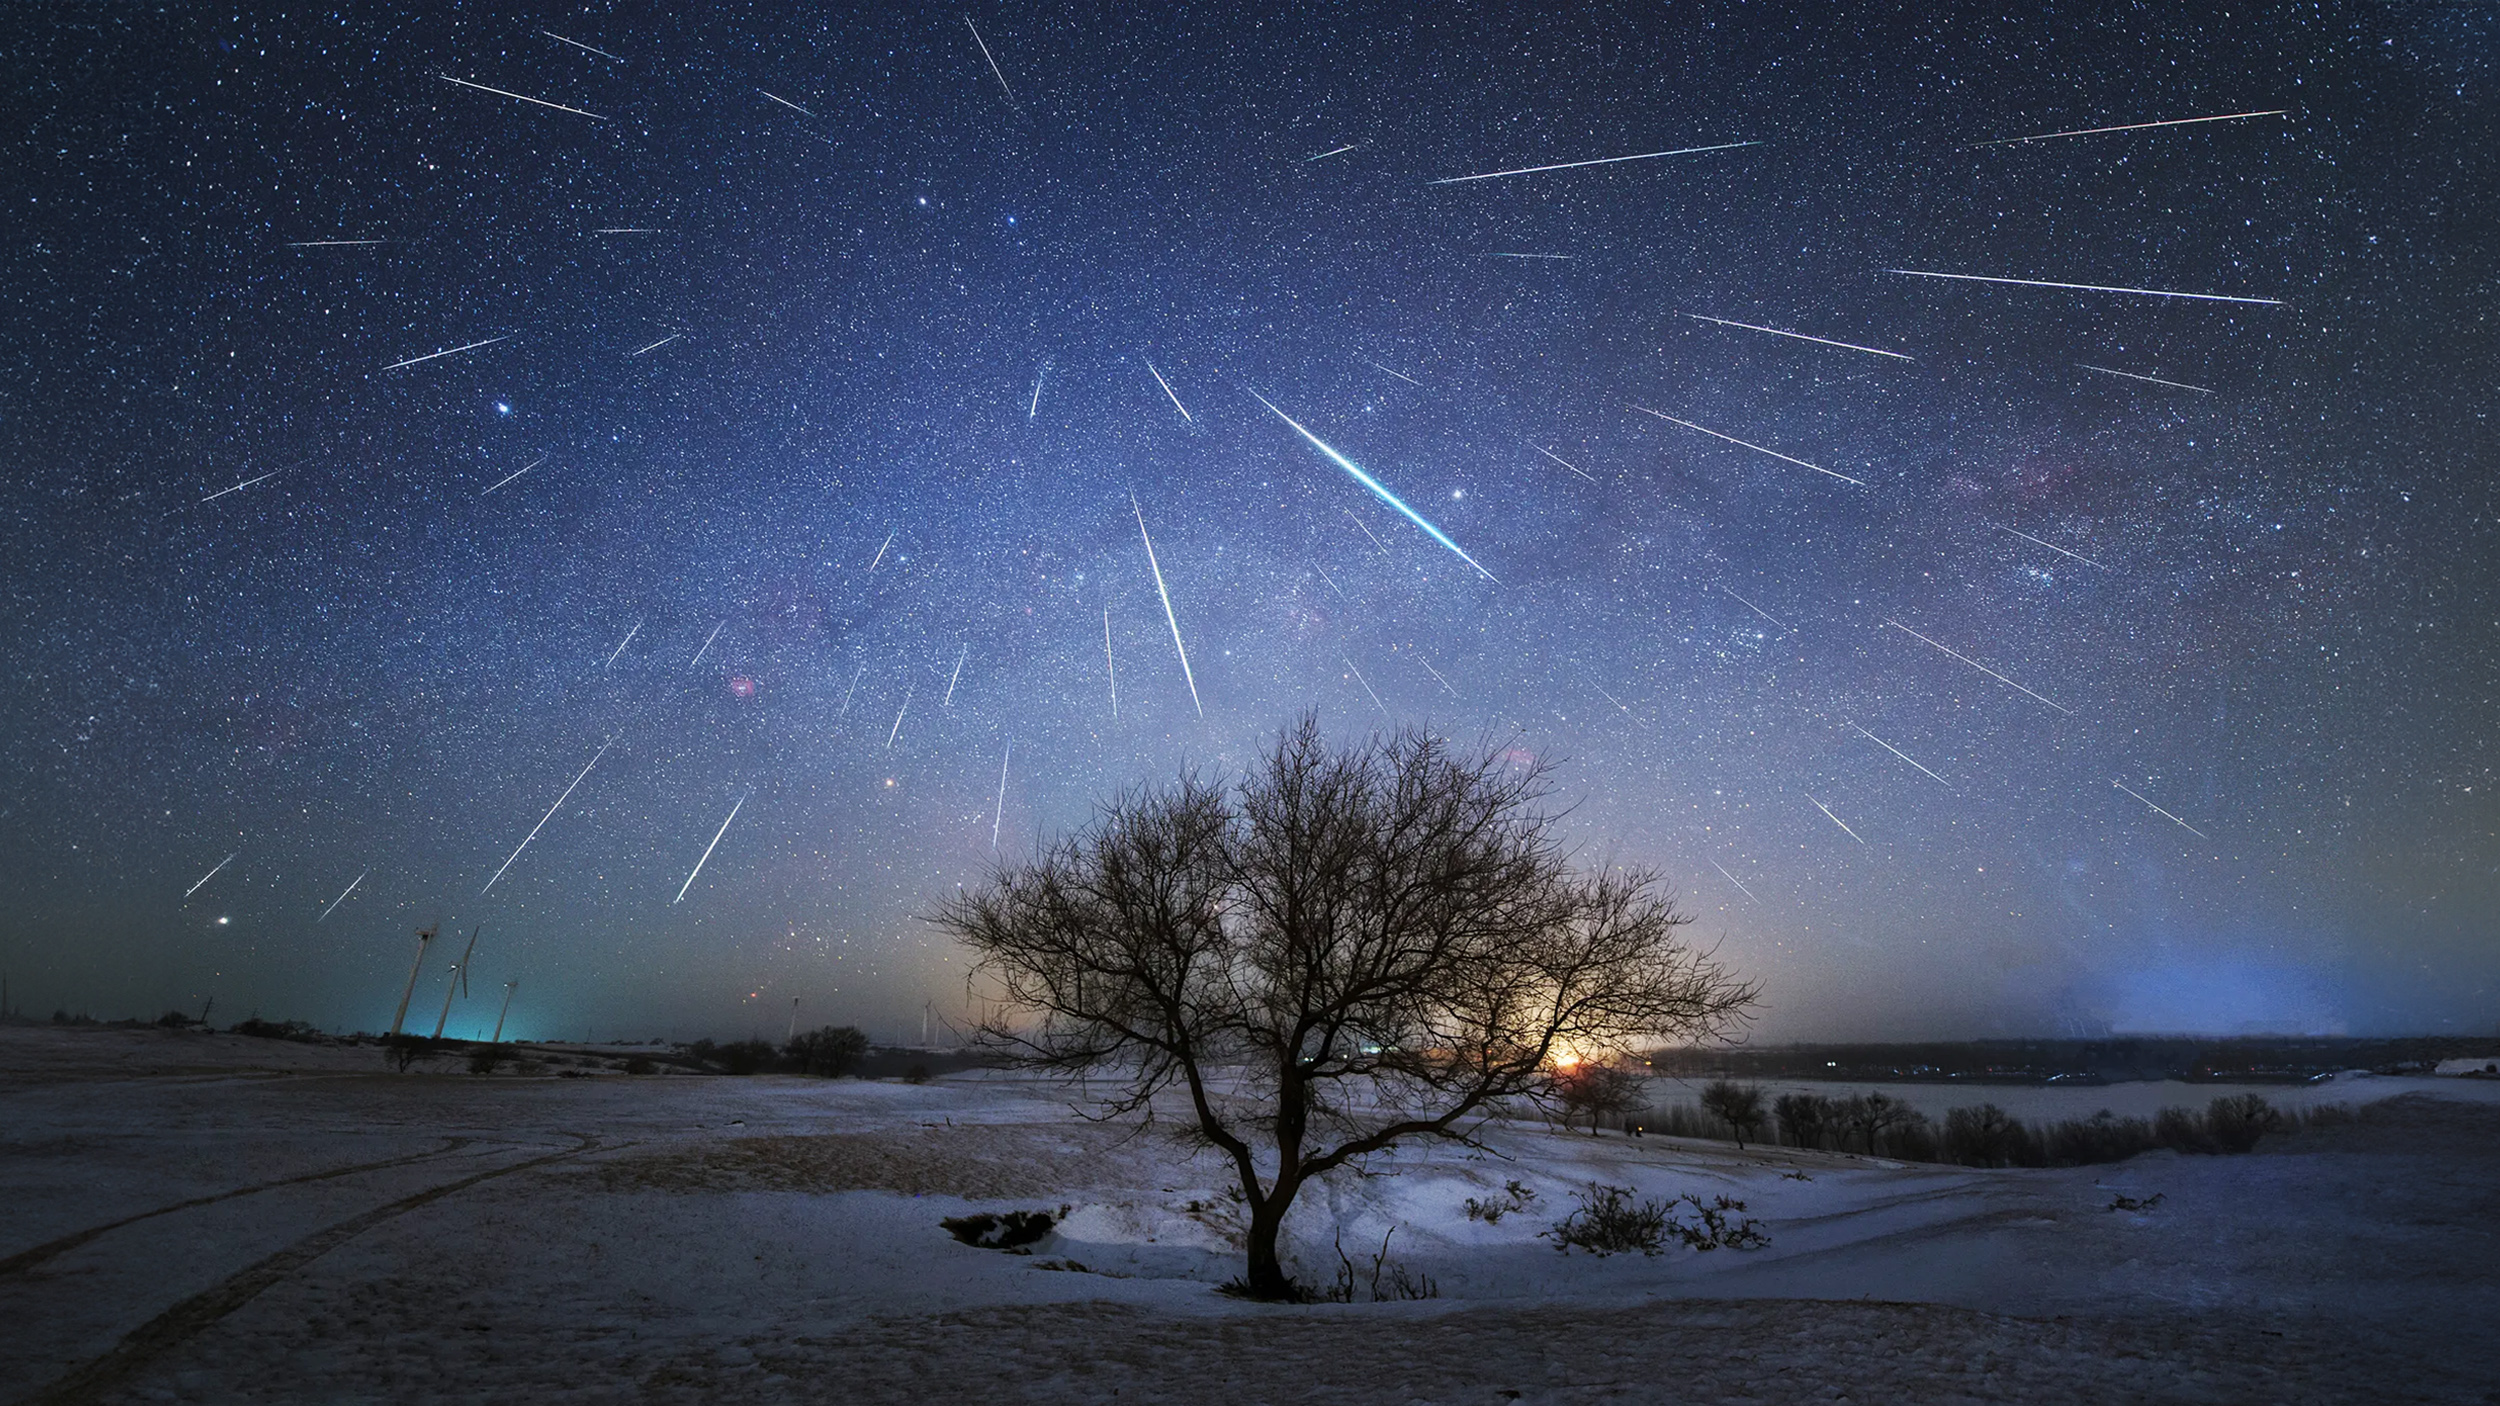 A mesmerizing starry sky with shooting stars and a majestic tree.